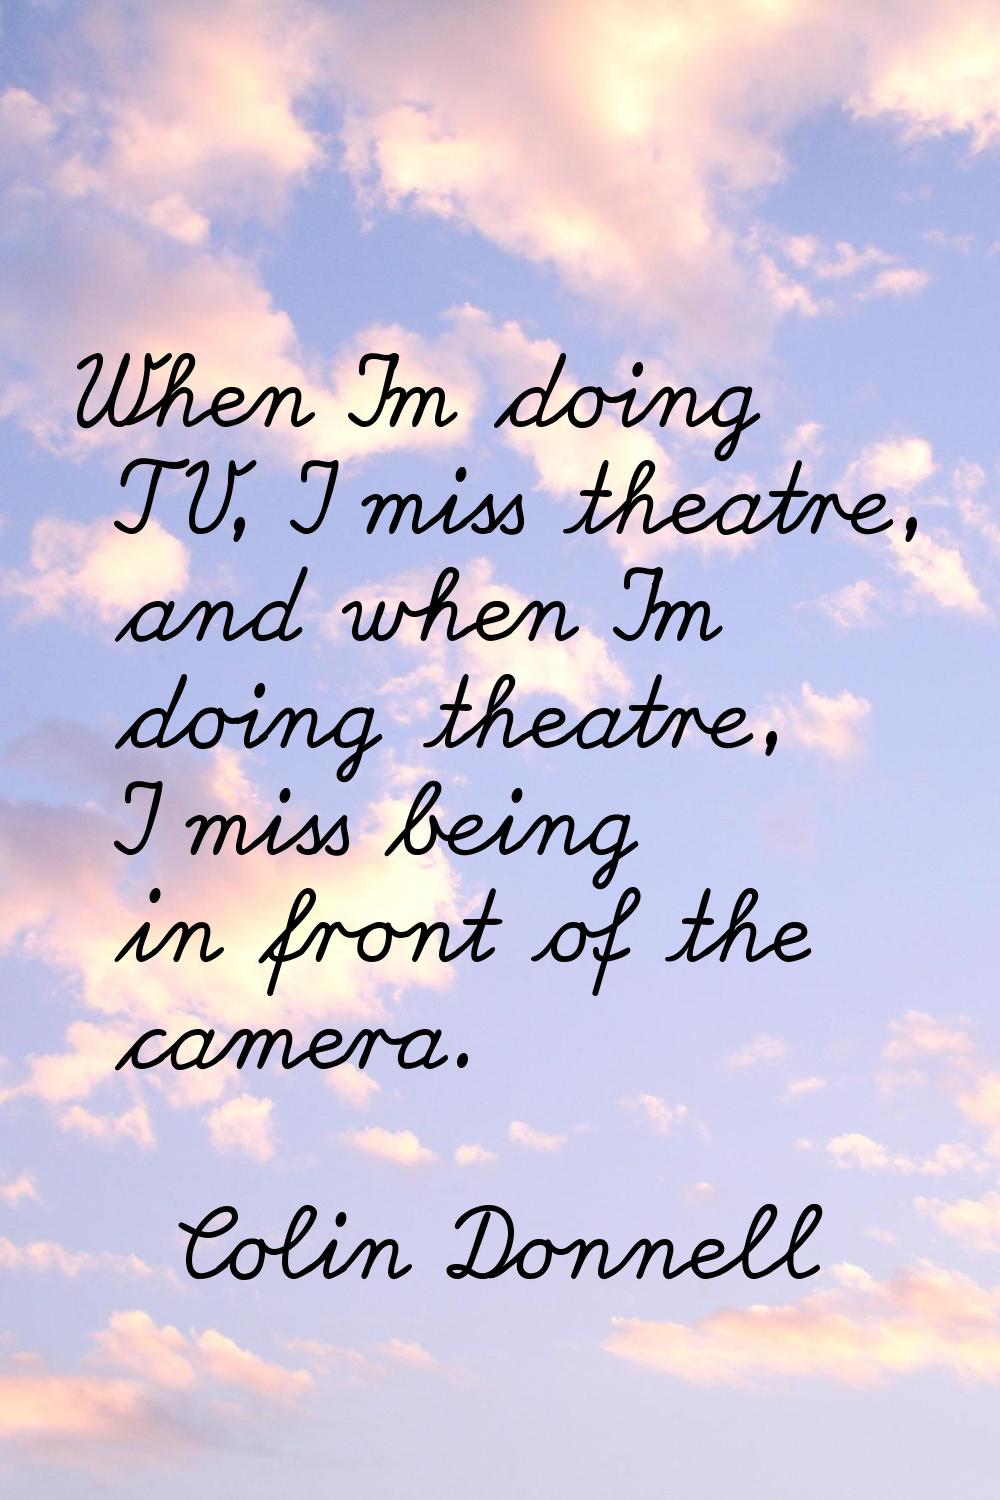 When I'm doing TV, I miss theatre, and when I'm doing theatre, I miss being in front of the camera.